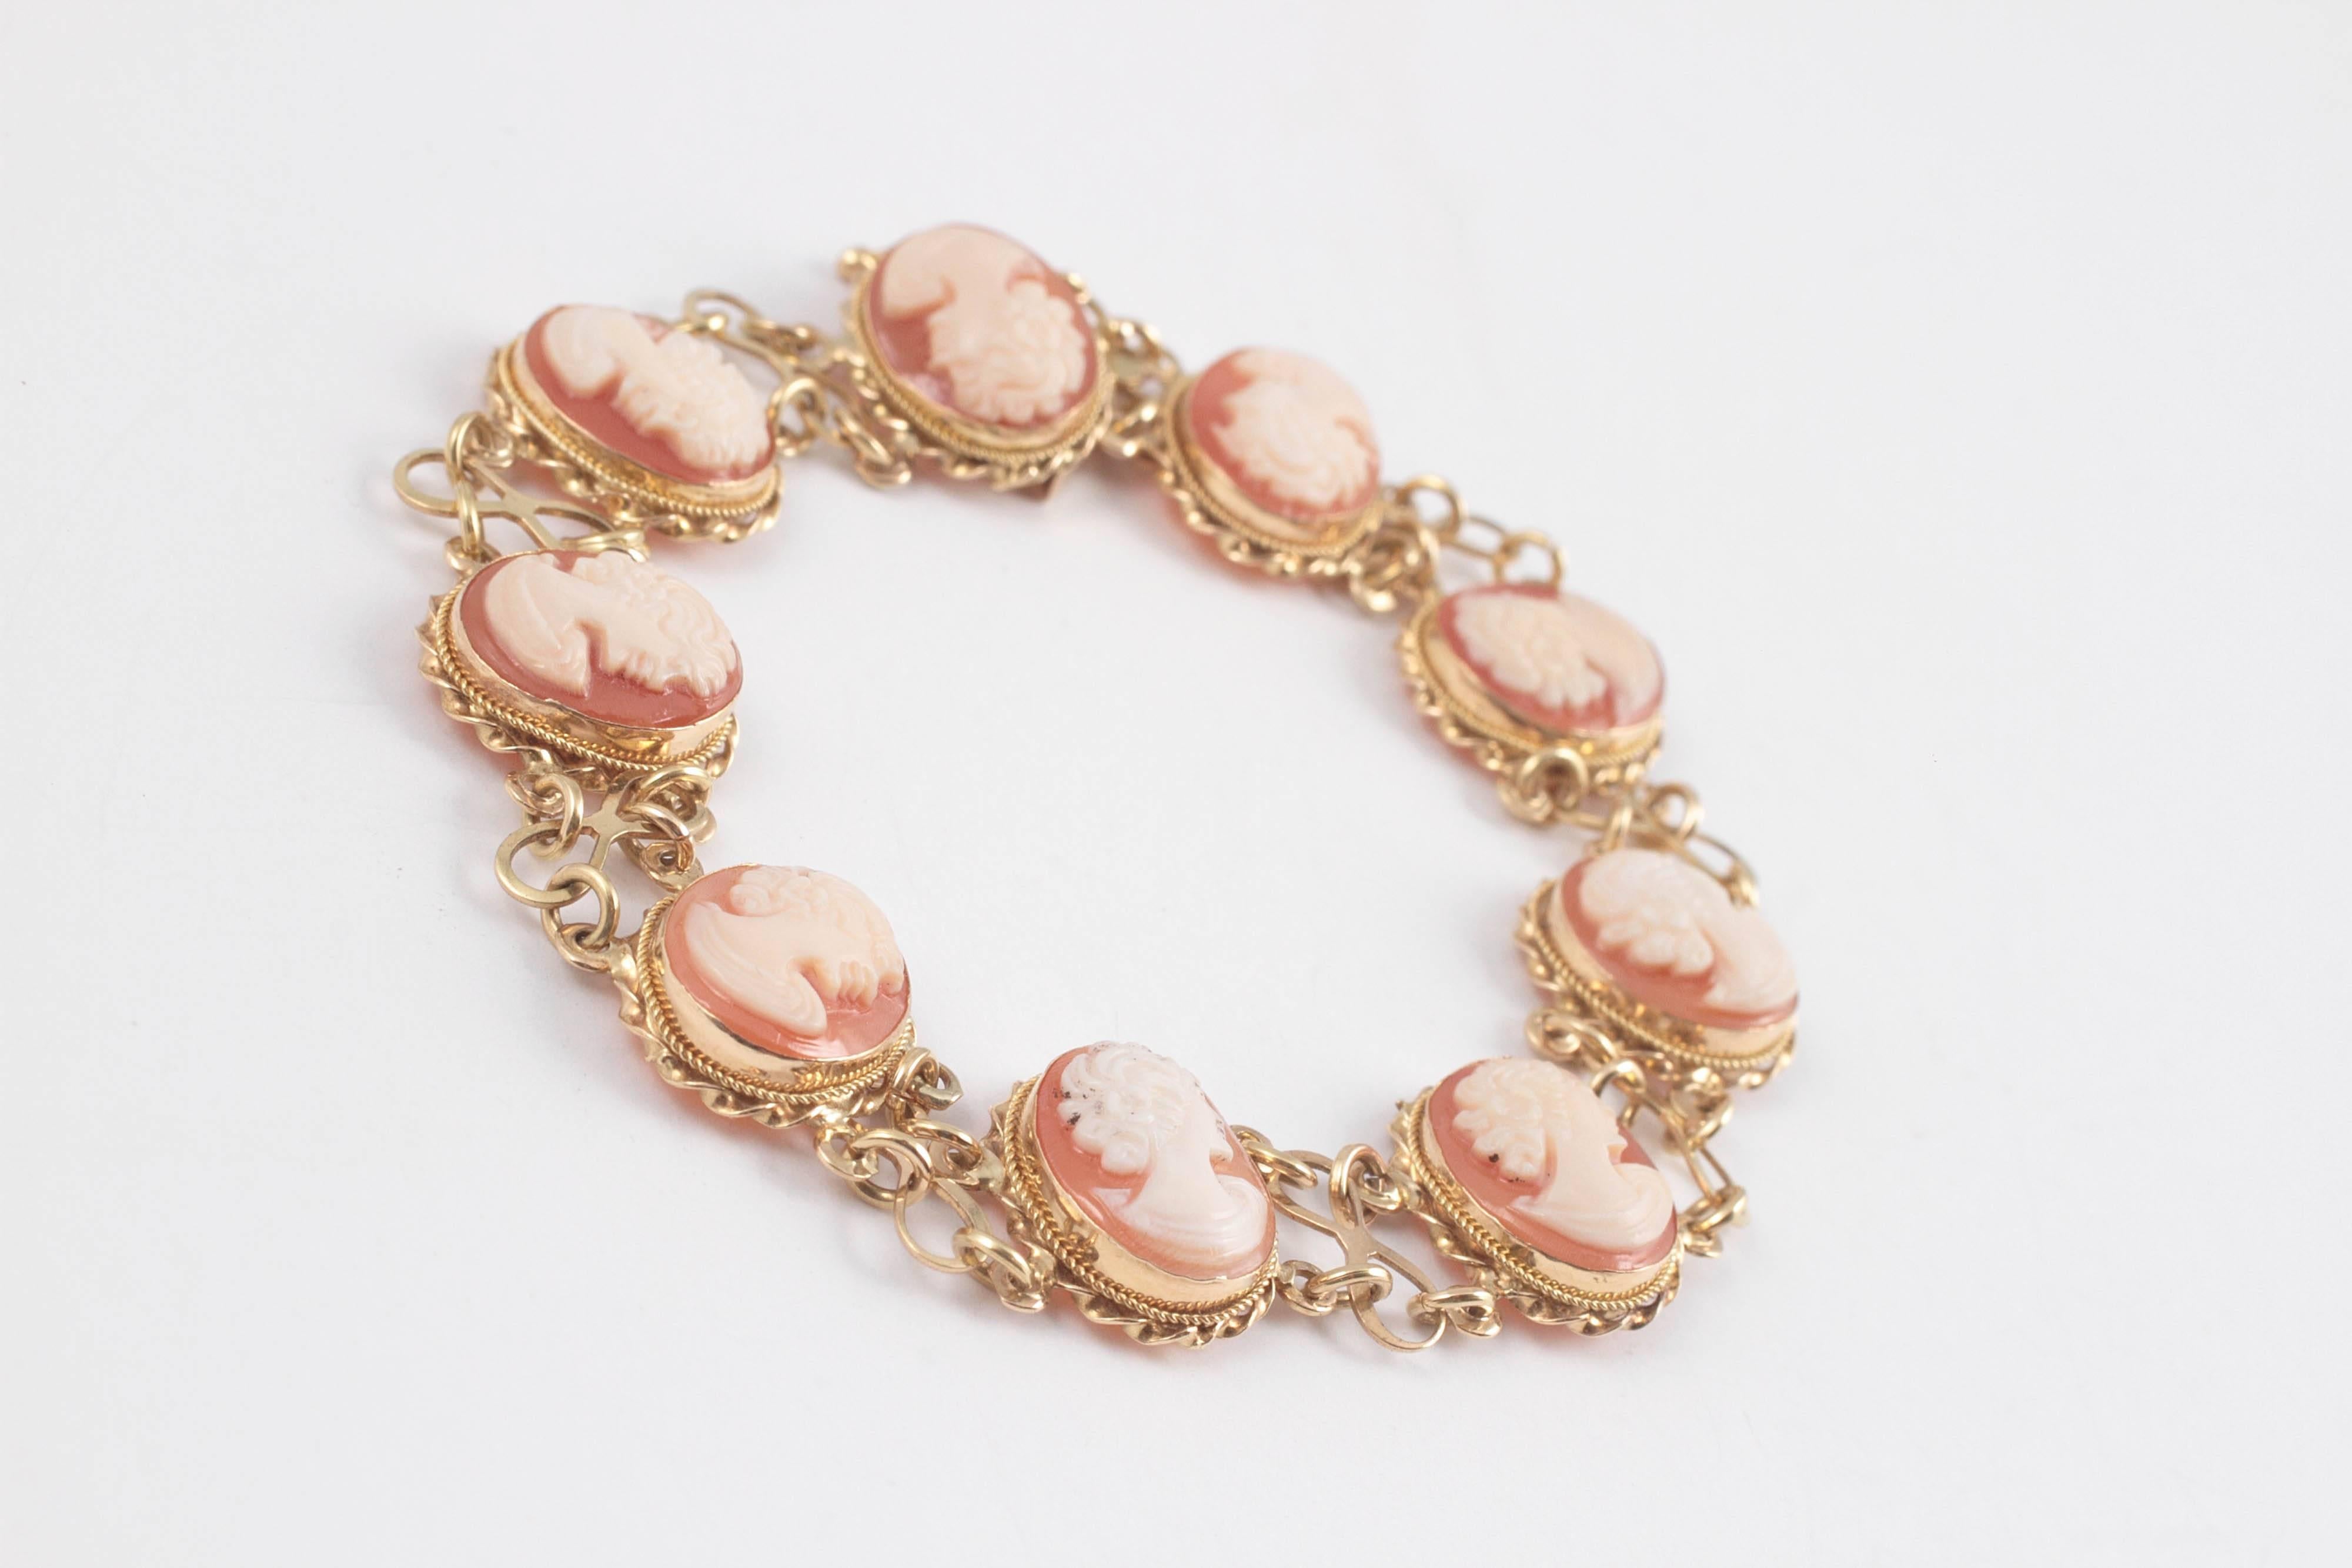 18 Karat yellow gold shell cameo bracelet.  We get a lot of cameo pins, but not so many bracelets.  Try this one out.  